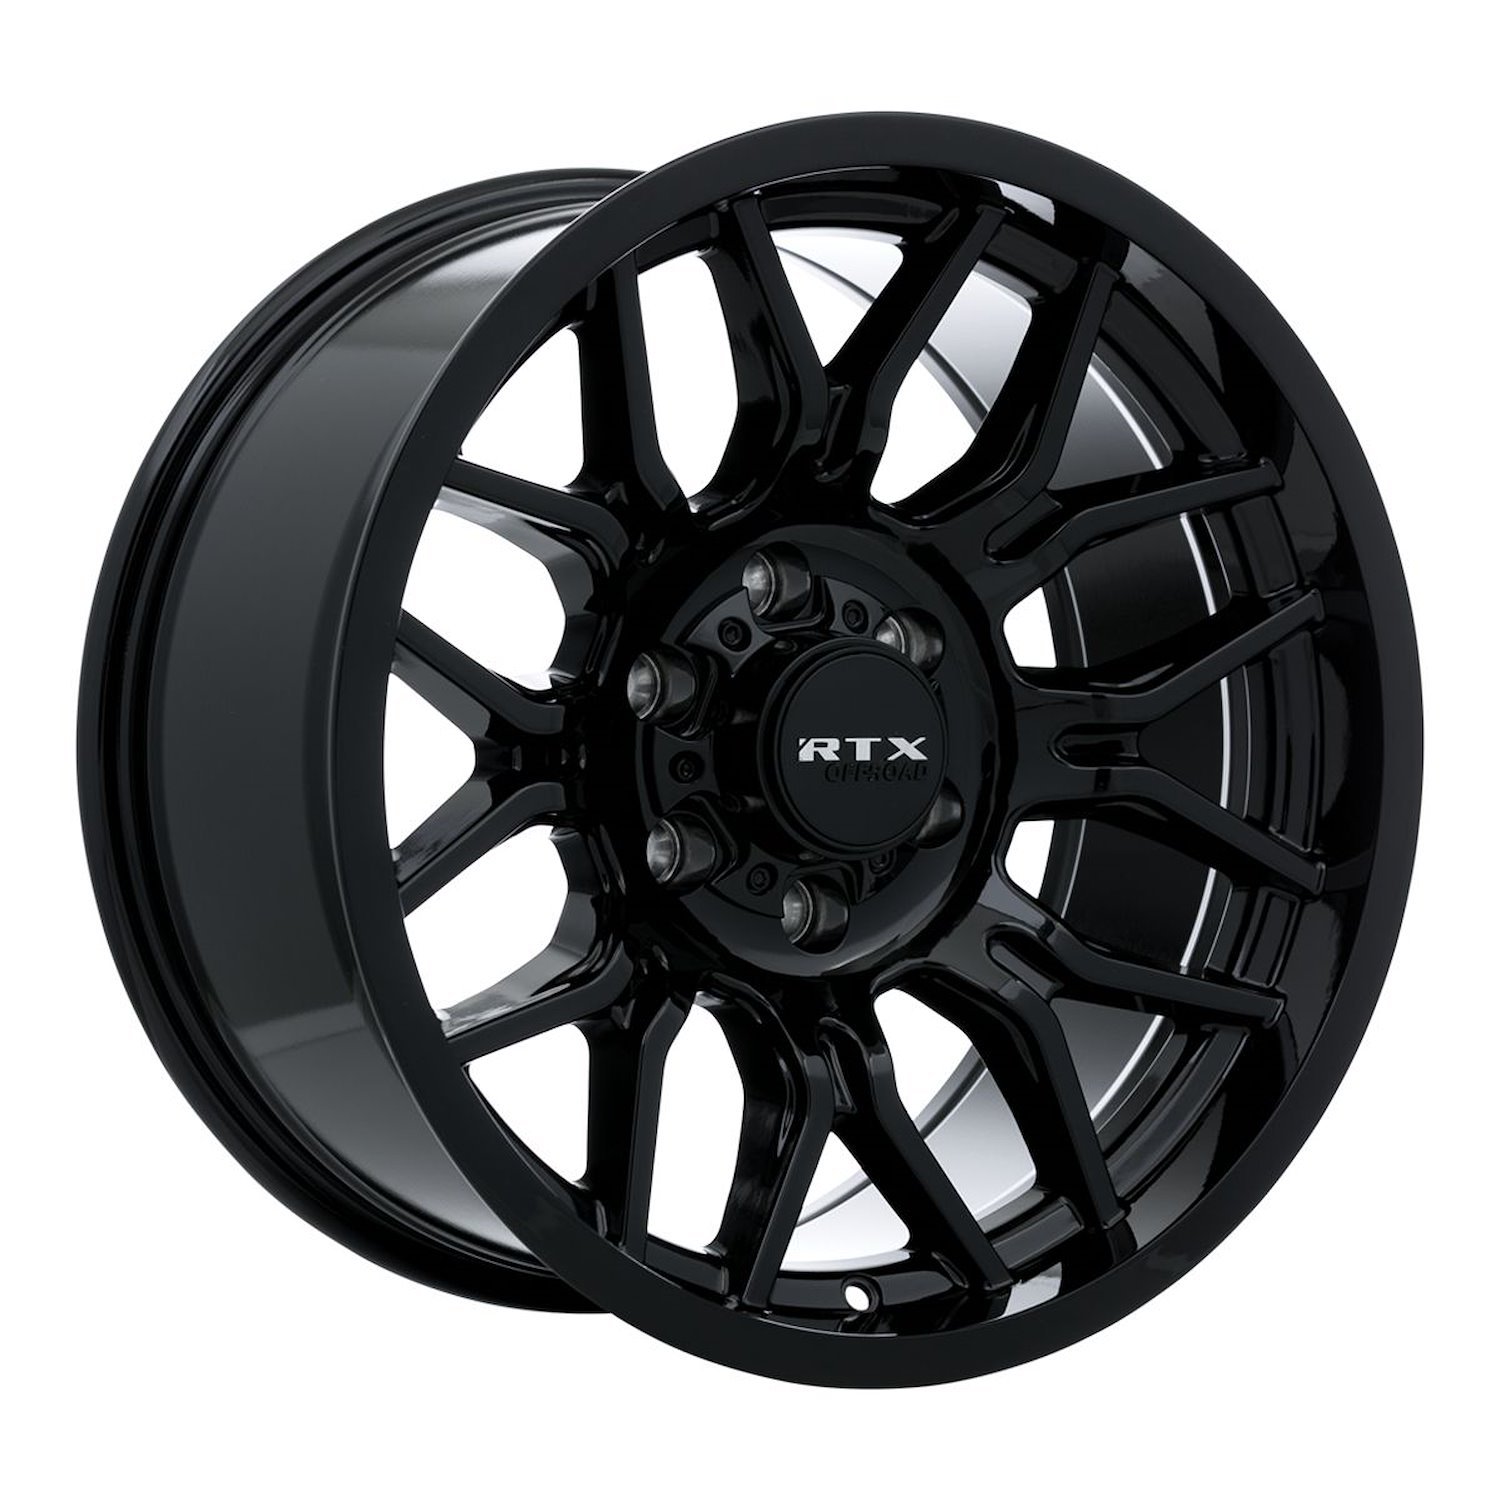 163758 Off-Road Series Claw Wheel [Size: 20" x 9"] Gloss Black Finish